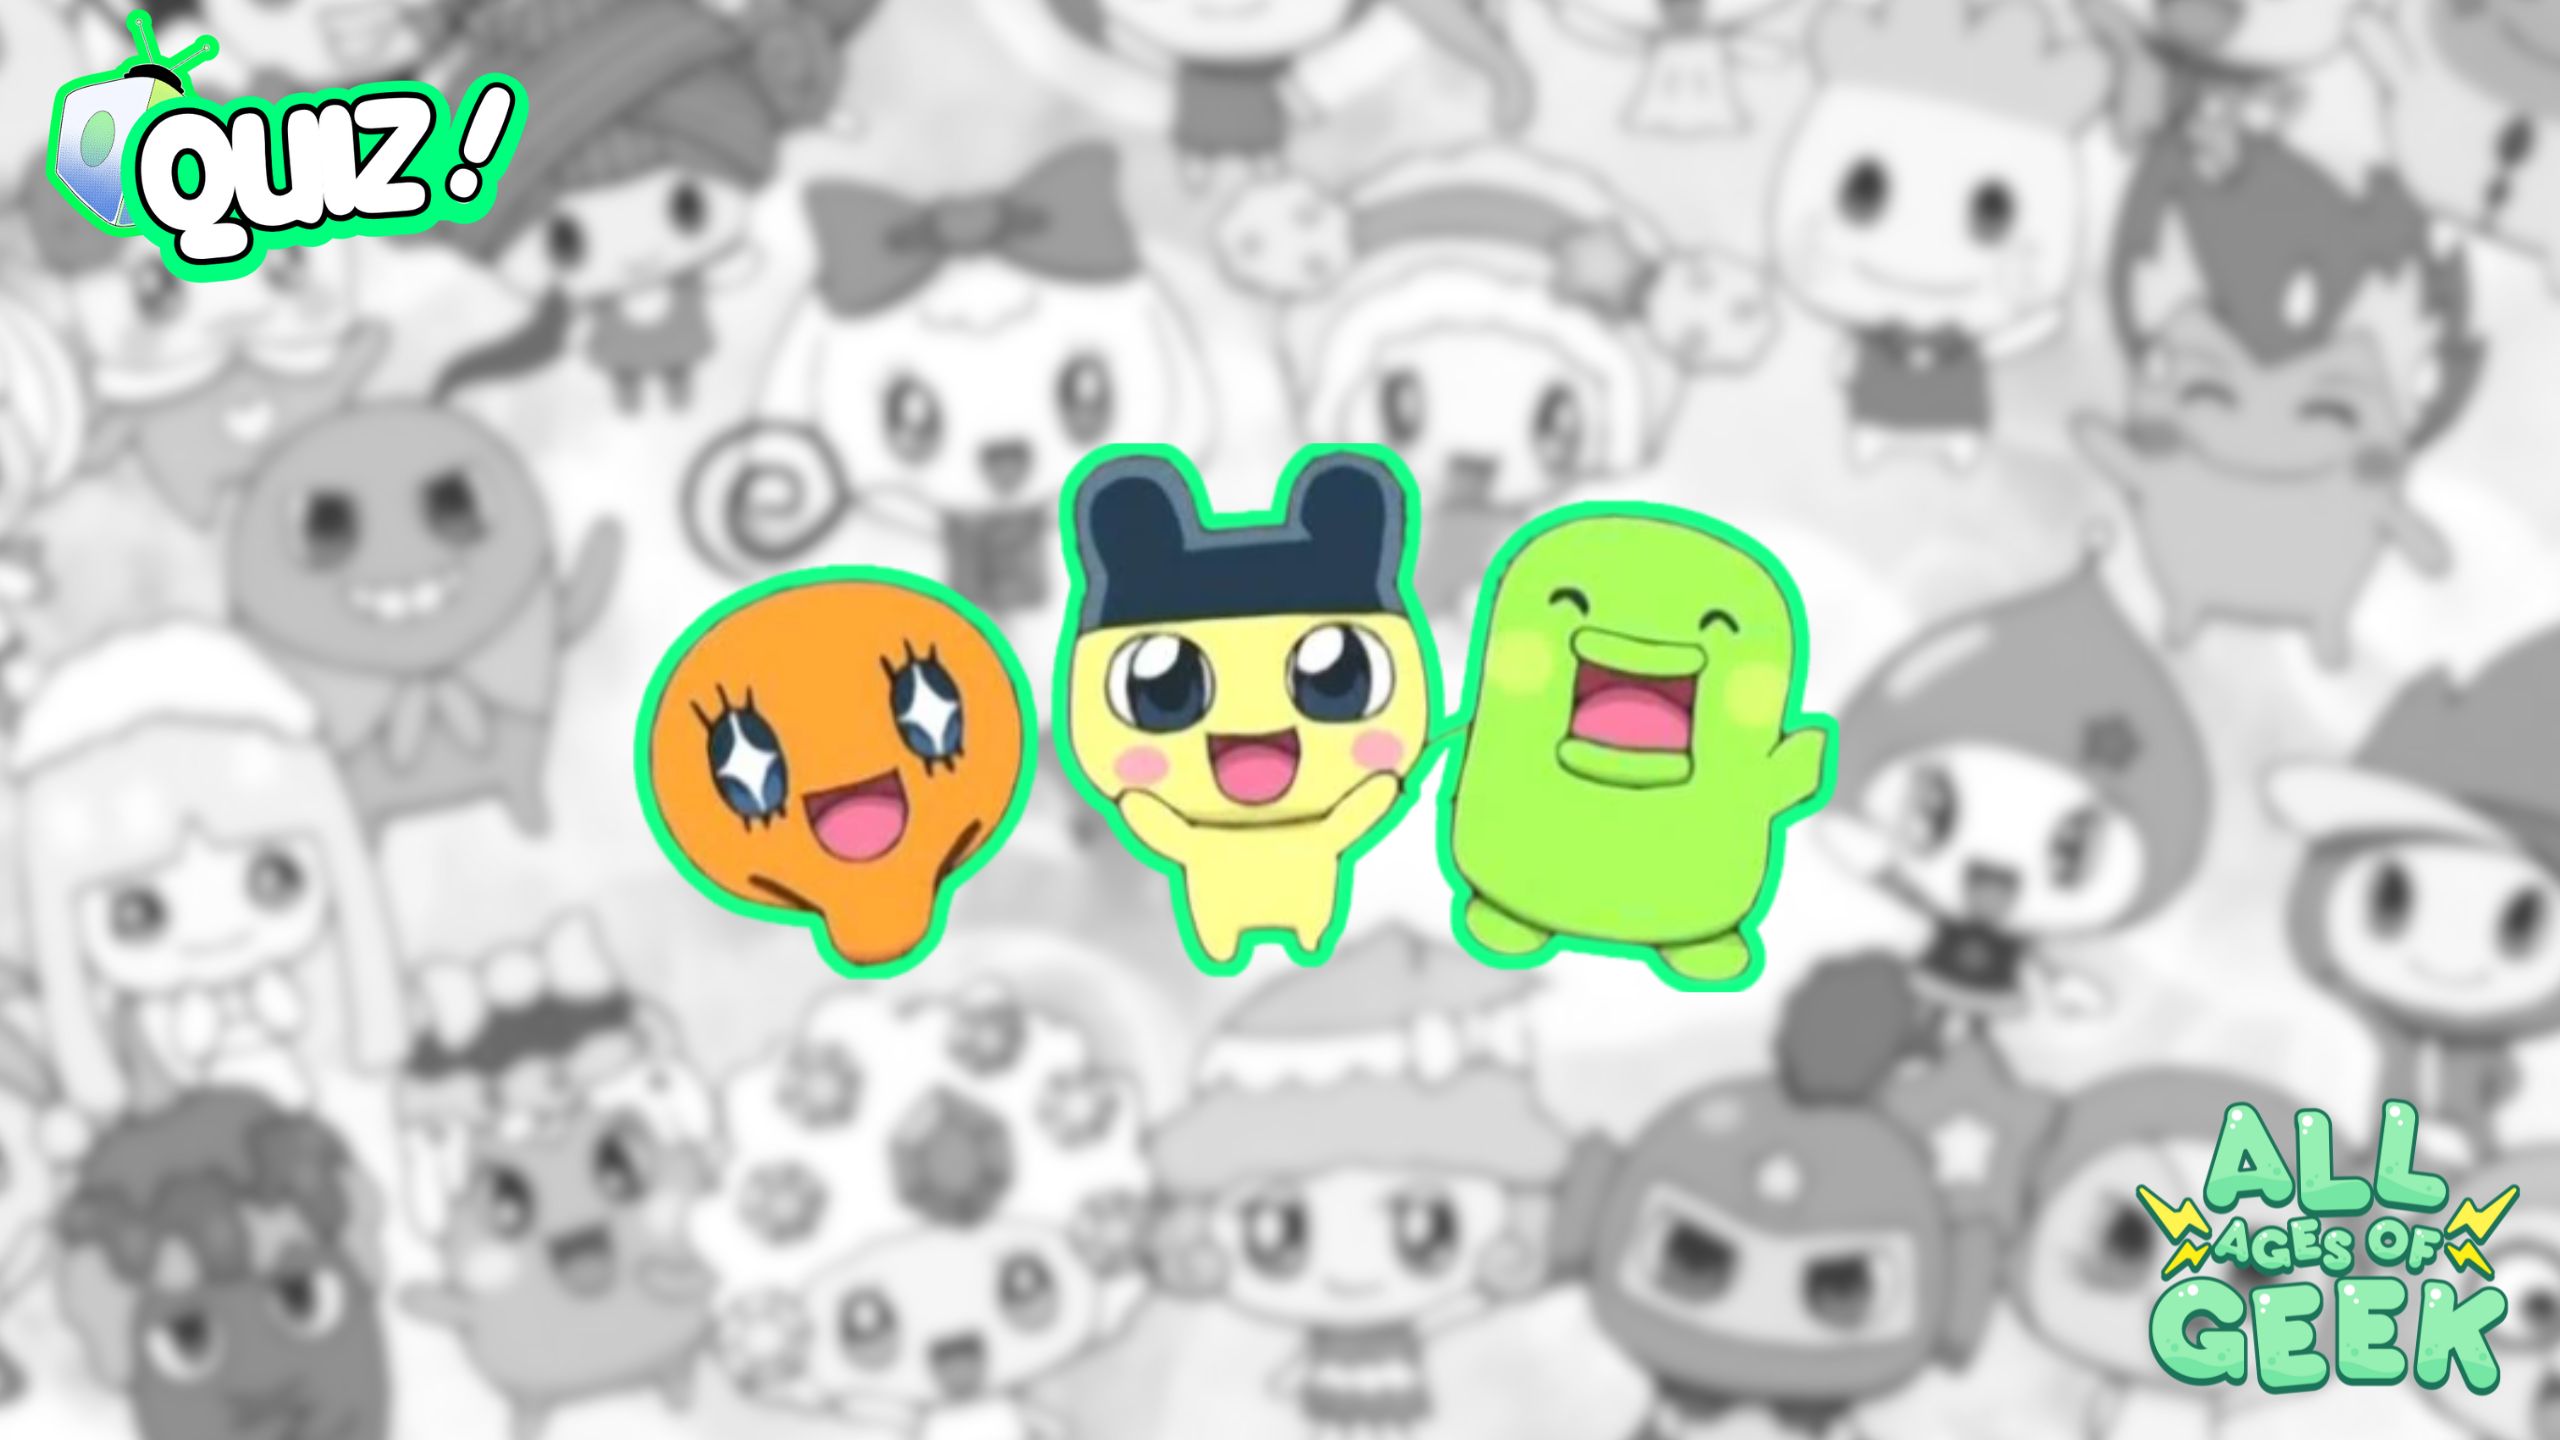 "The image features three central Tamagotchi characters in vibrant colors: an orange character with sparkling eyes, a yellow character with a black hat, and a green character laughing joyfully. They stand out against a grayscale background filled with various other Tamagotchi characters. The All Ages of Geek logo is present in the bottom right corner, and a 'Quiz!' logo is in the top left."